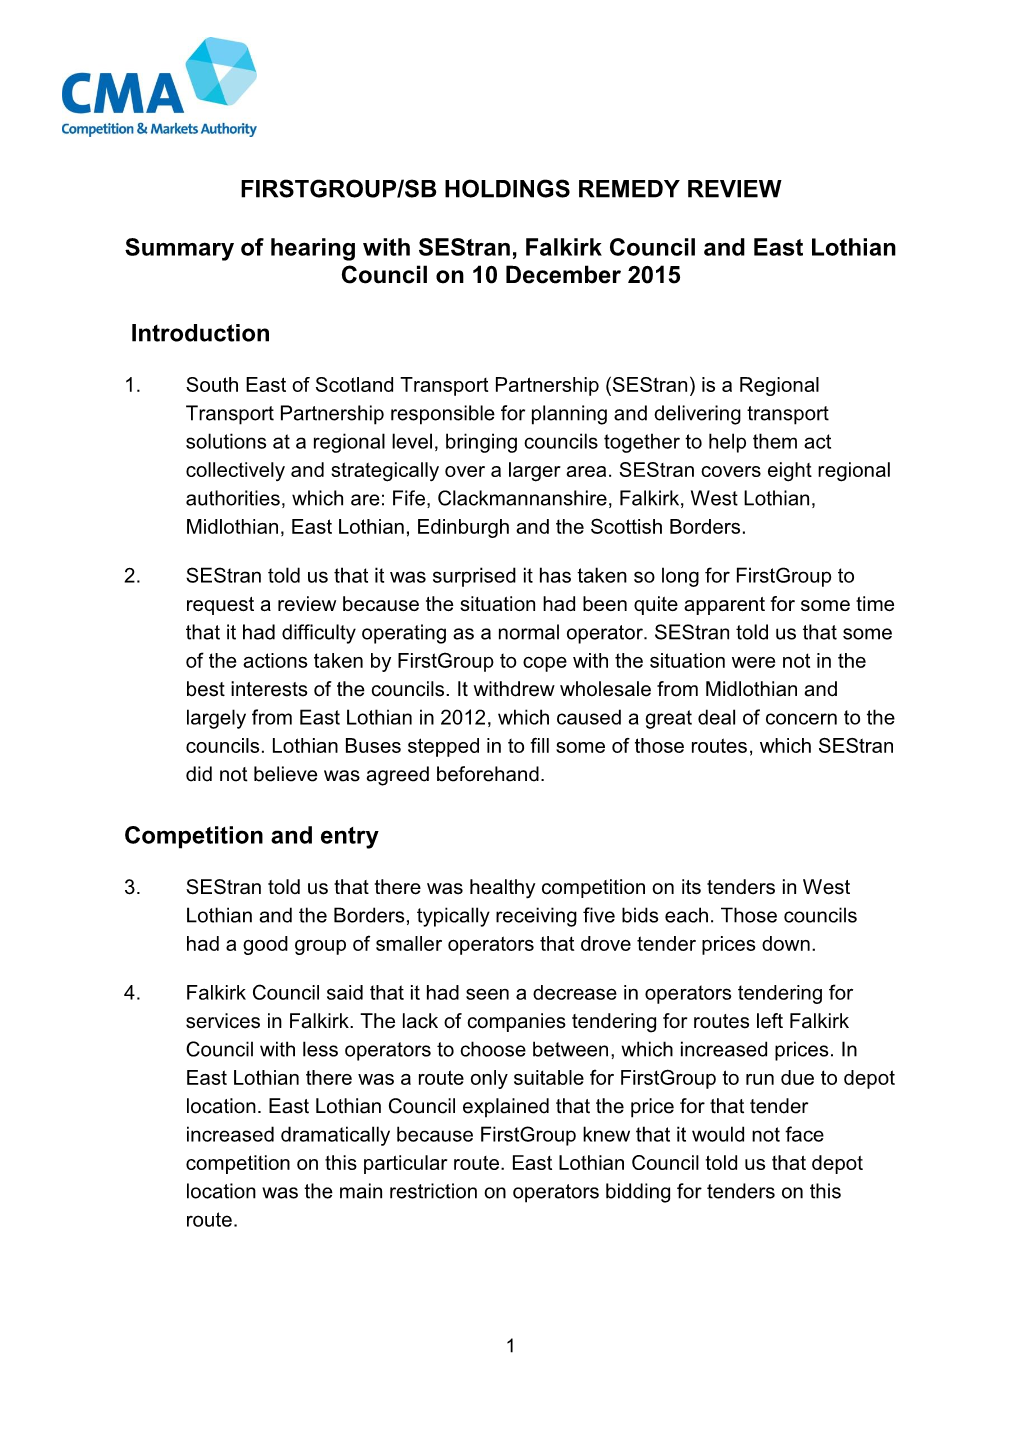 Sestran, Falkirk Council and East Lothian Council on 10 December 2015